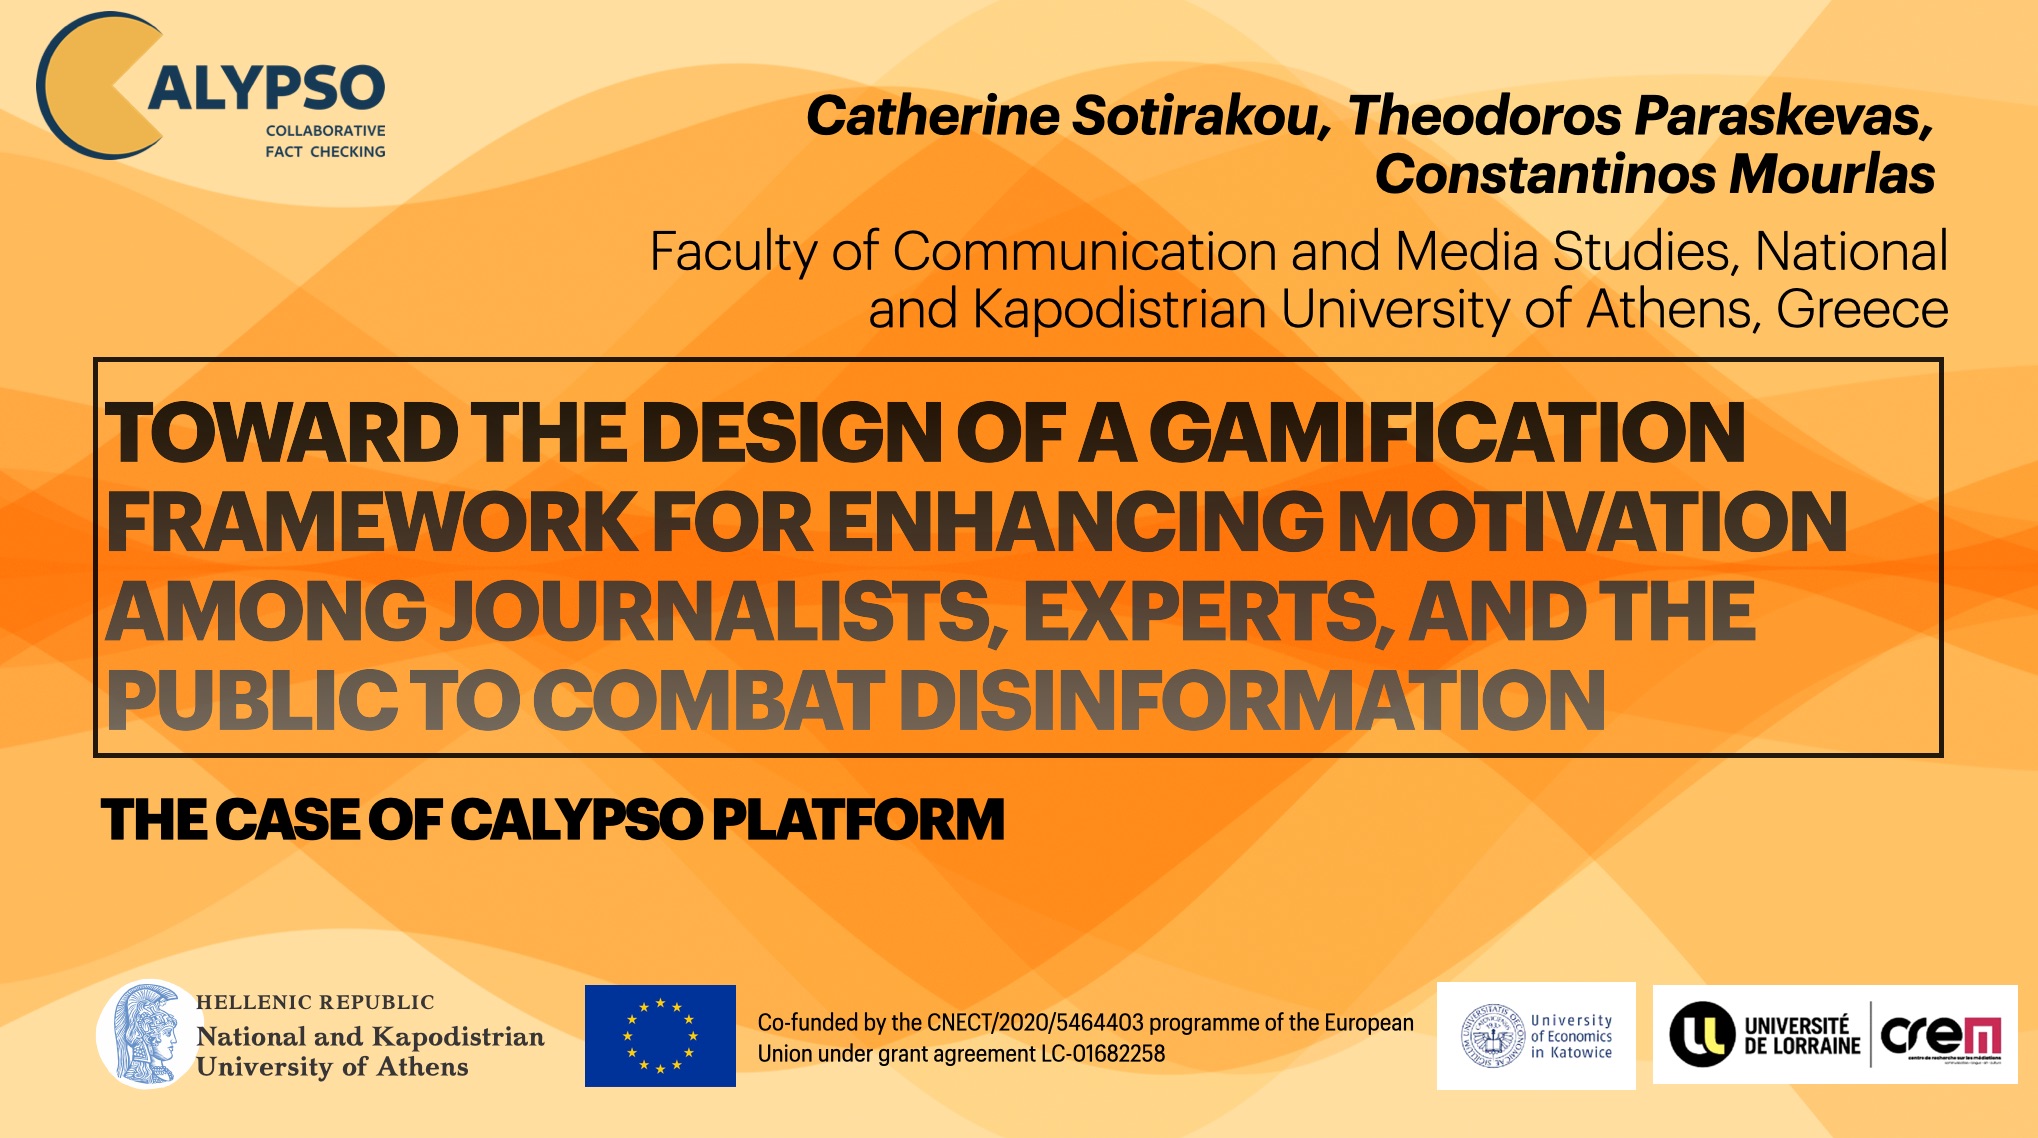 Toward the Design of a Gamification Framework for Enhancing Motivation Among Journalists, Experts, and the Public to Combat Disinformation: The Case of CALYPSO Platform”, presented at HCII2022 Conference